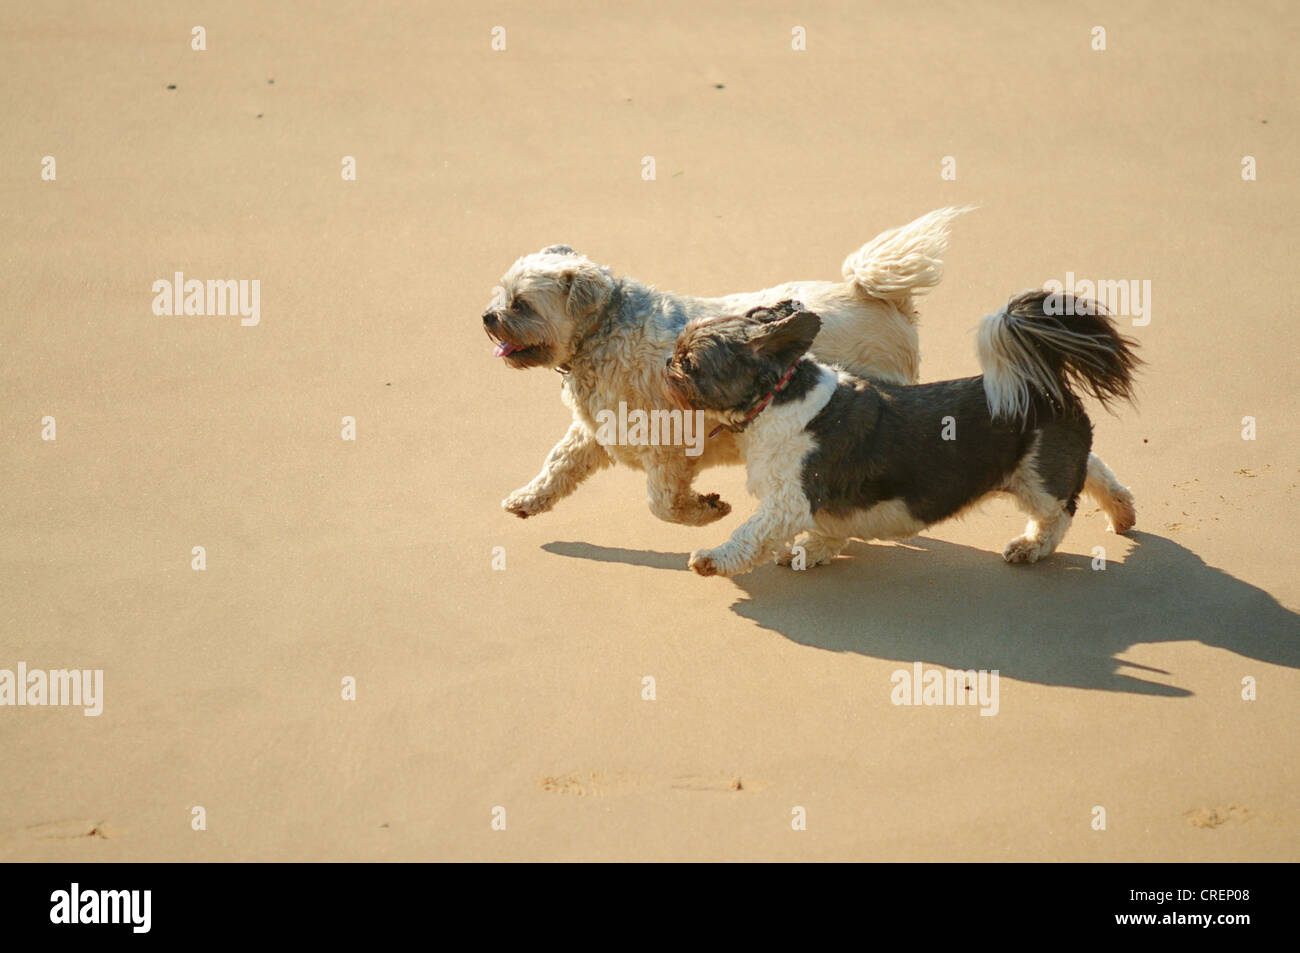 Two dogs running together along a sandy beach Stock Photo